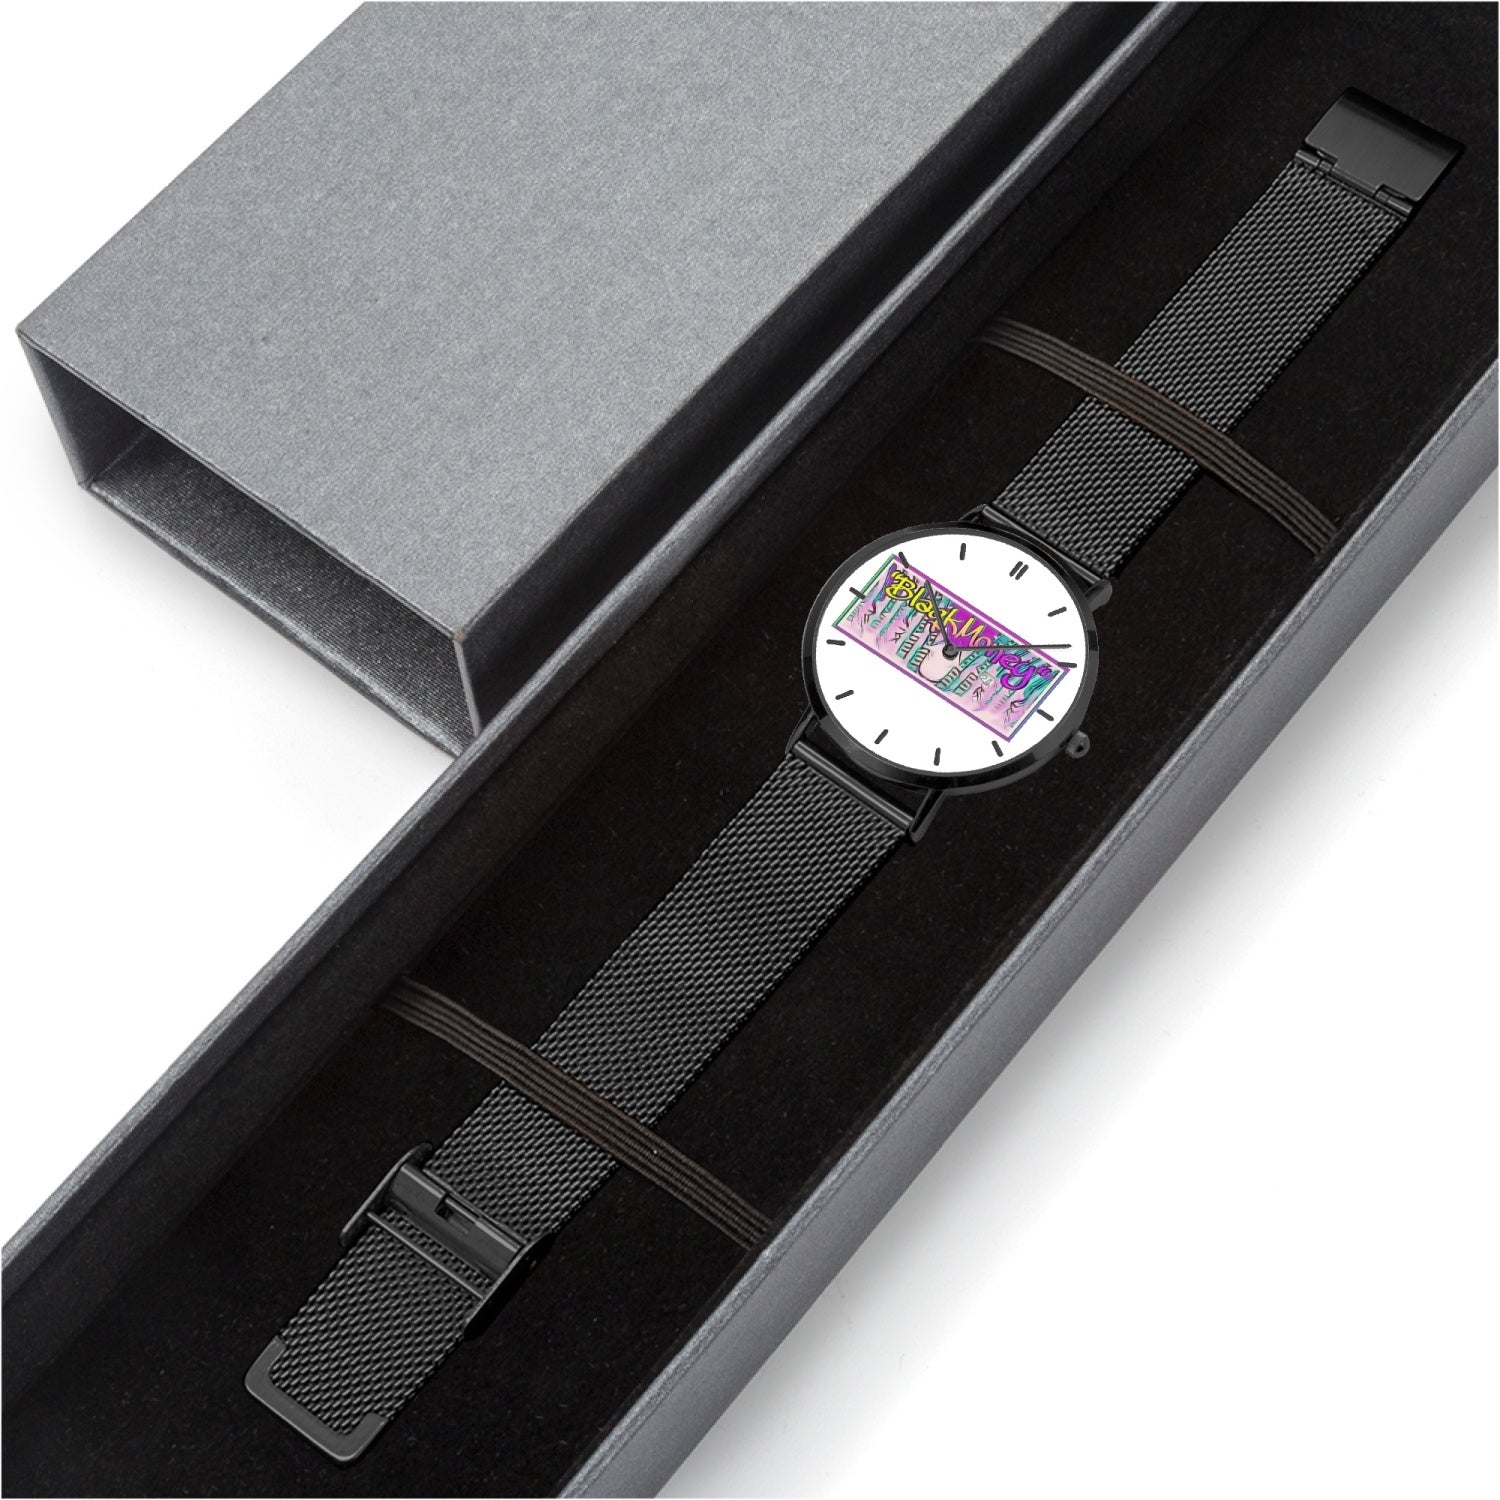 168. Stainless Steel Perpetual Calendar Quartz Watch (With Indicators)